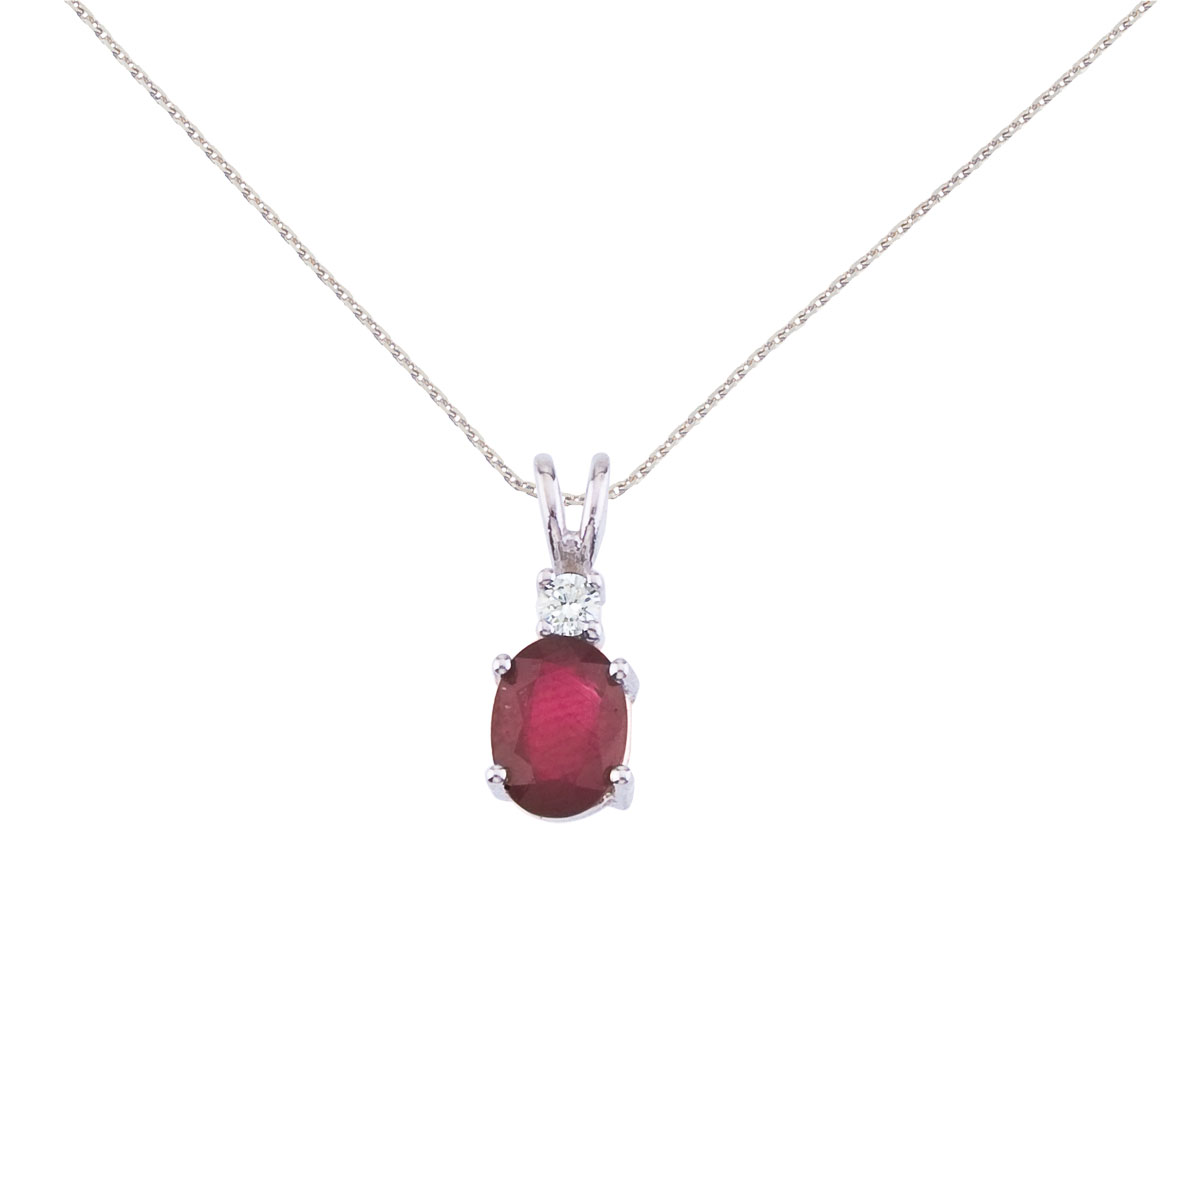 JCX2691: 7x5 mm natural ruby and diamond pendant set in 14k white gold.